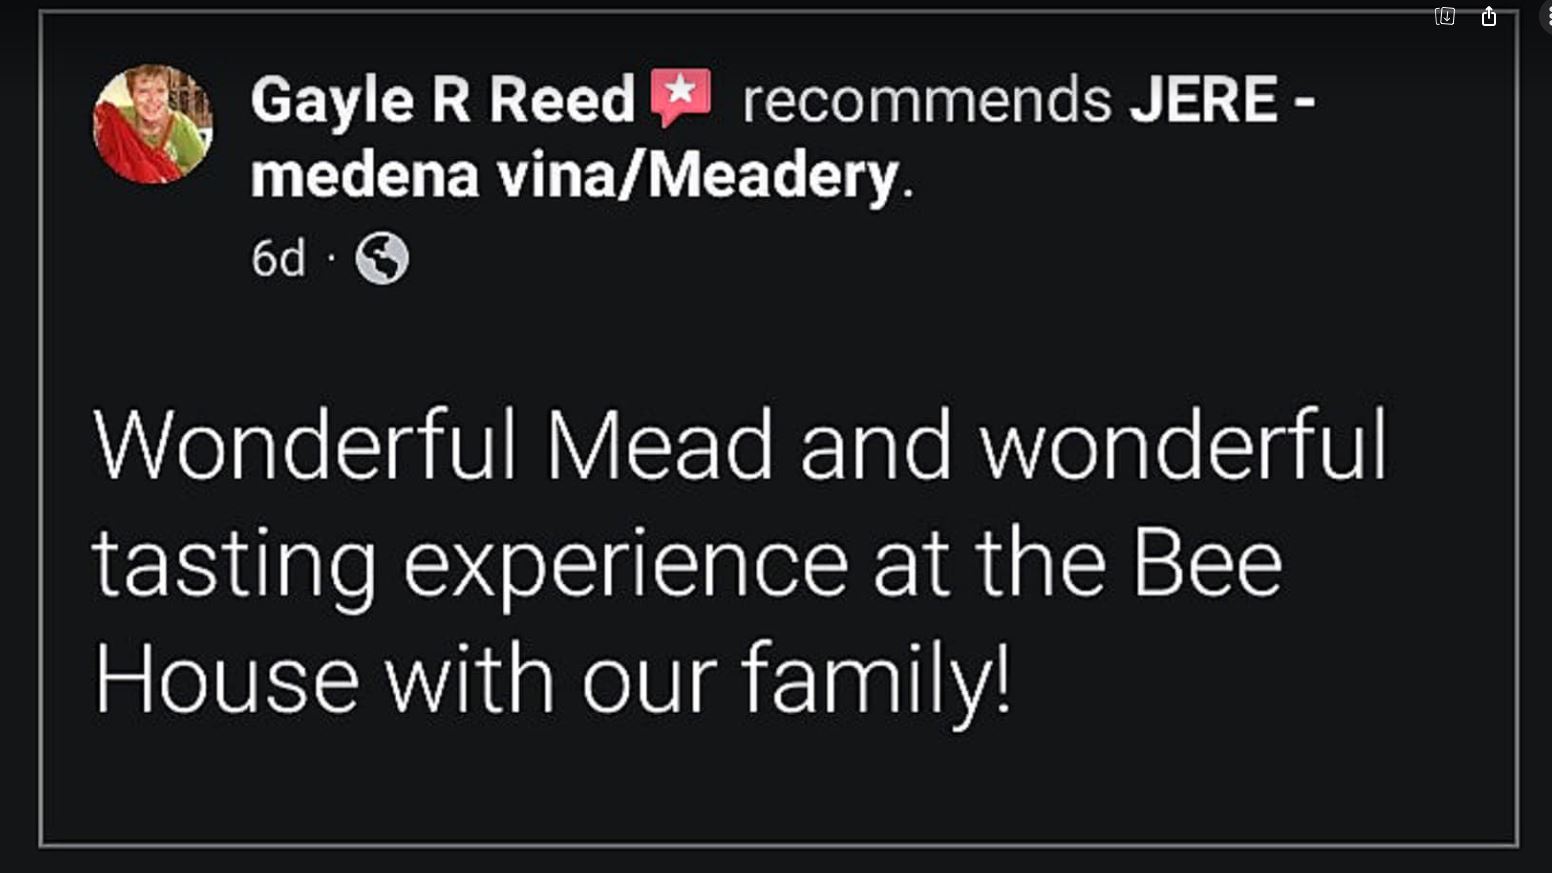 review Meadery Jere